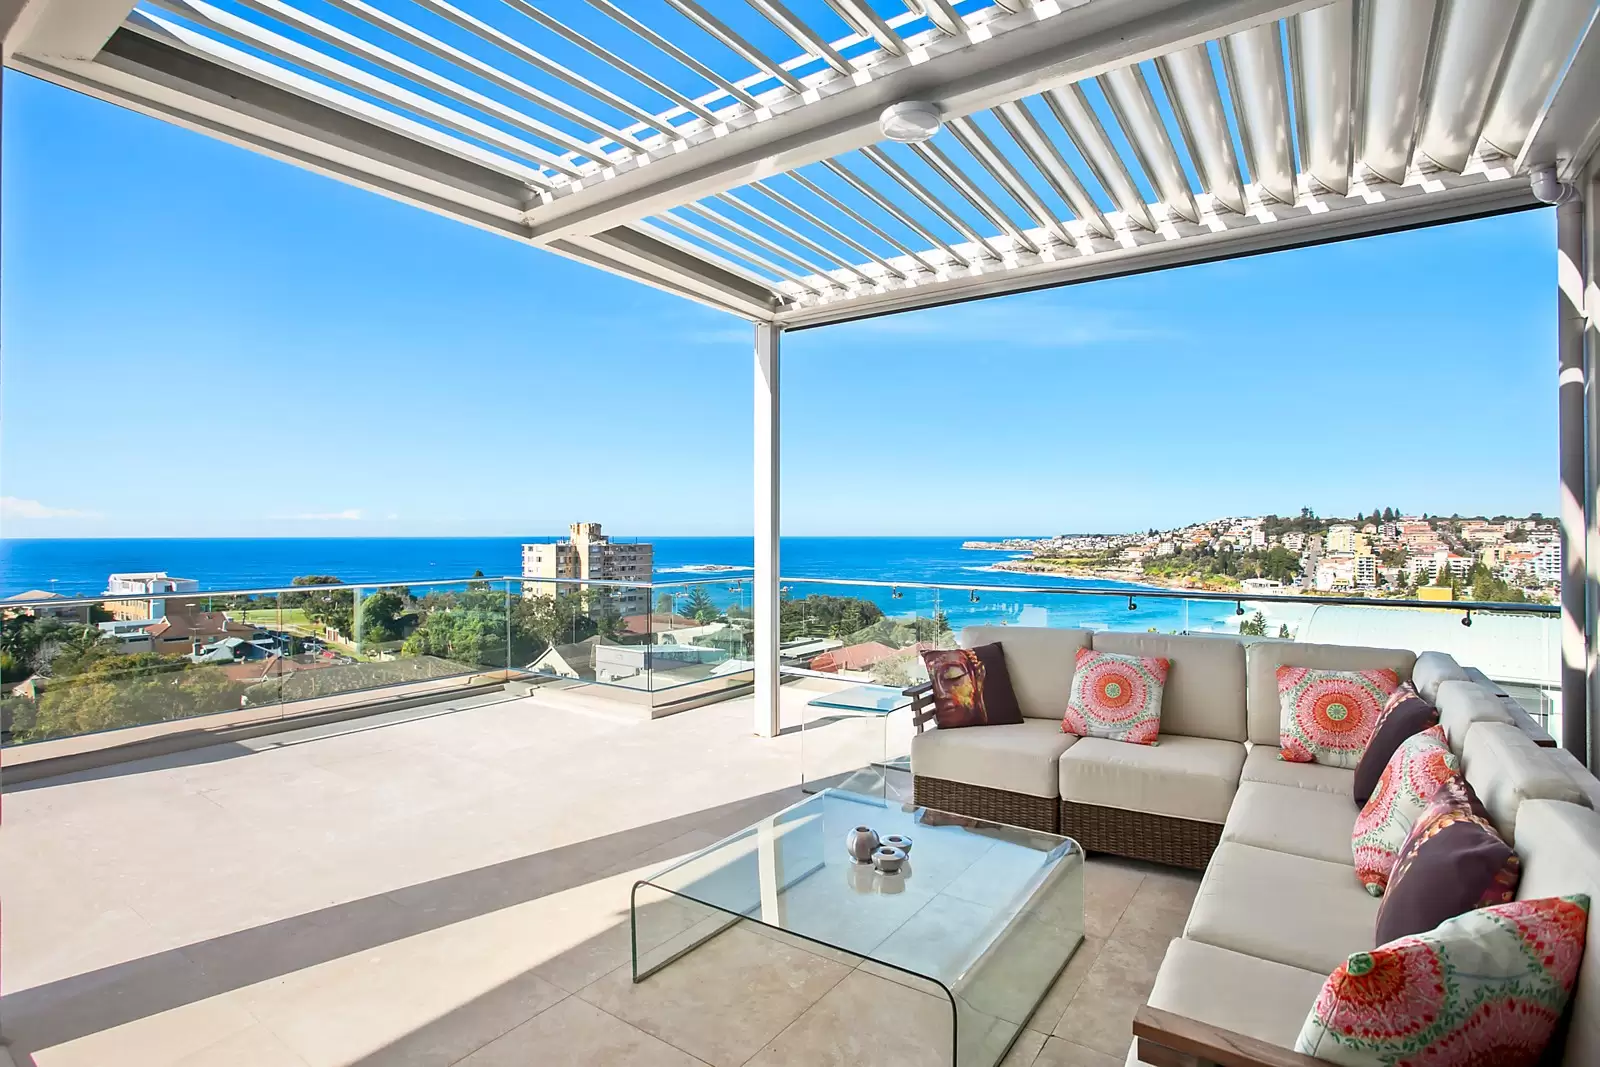 Photo #11: 6/88 Beach Street, Coogee - Sold by Sydney Sotheby's International Realty